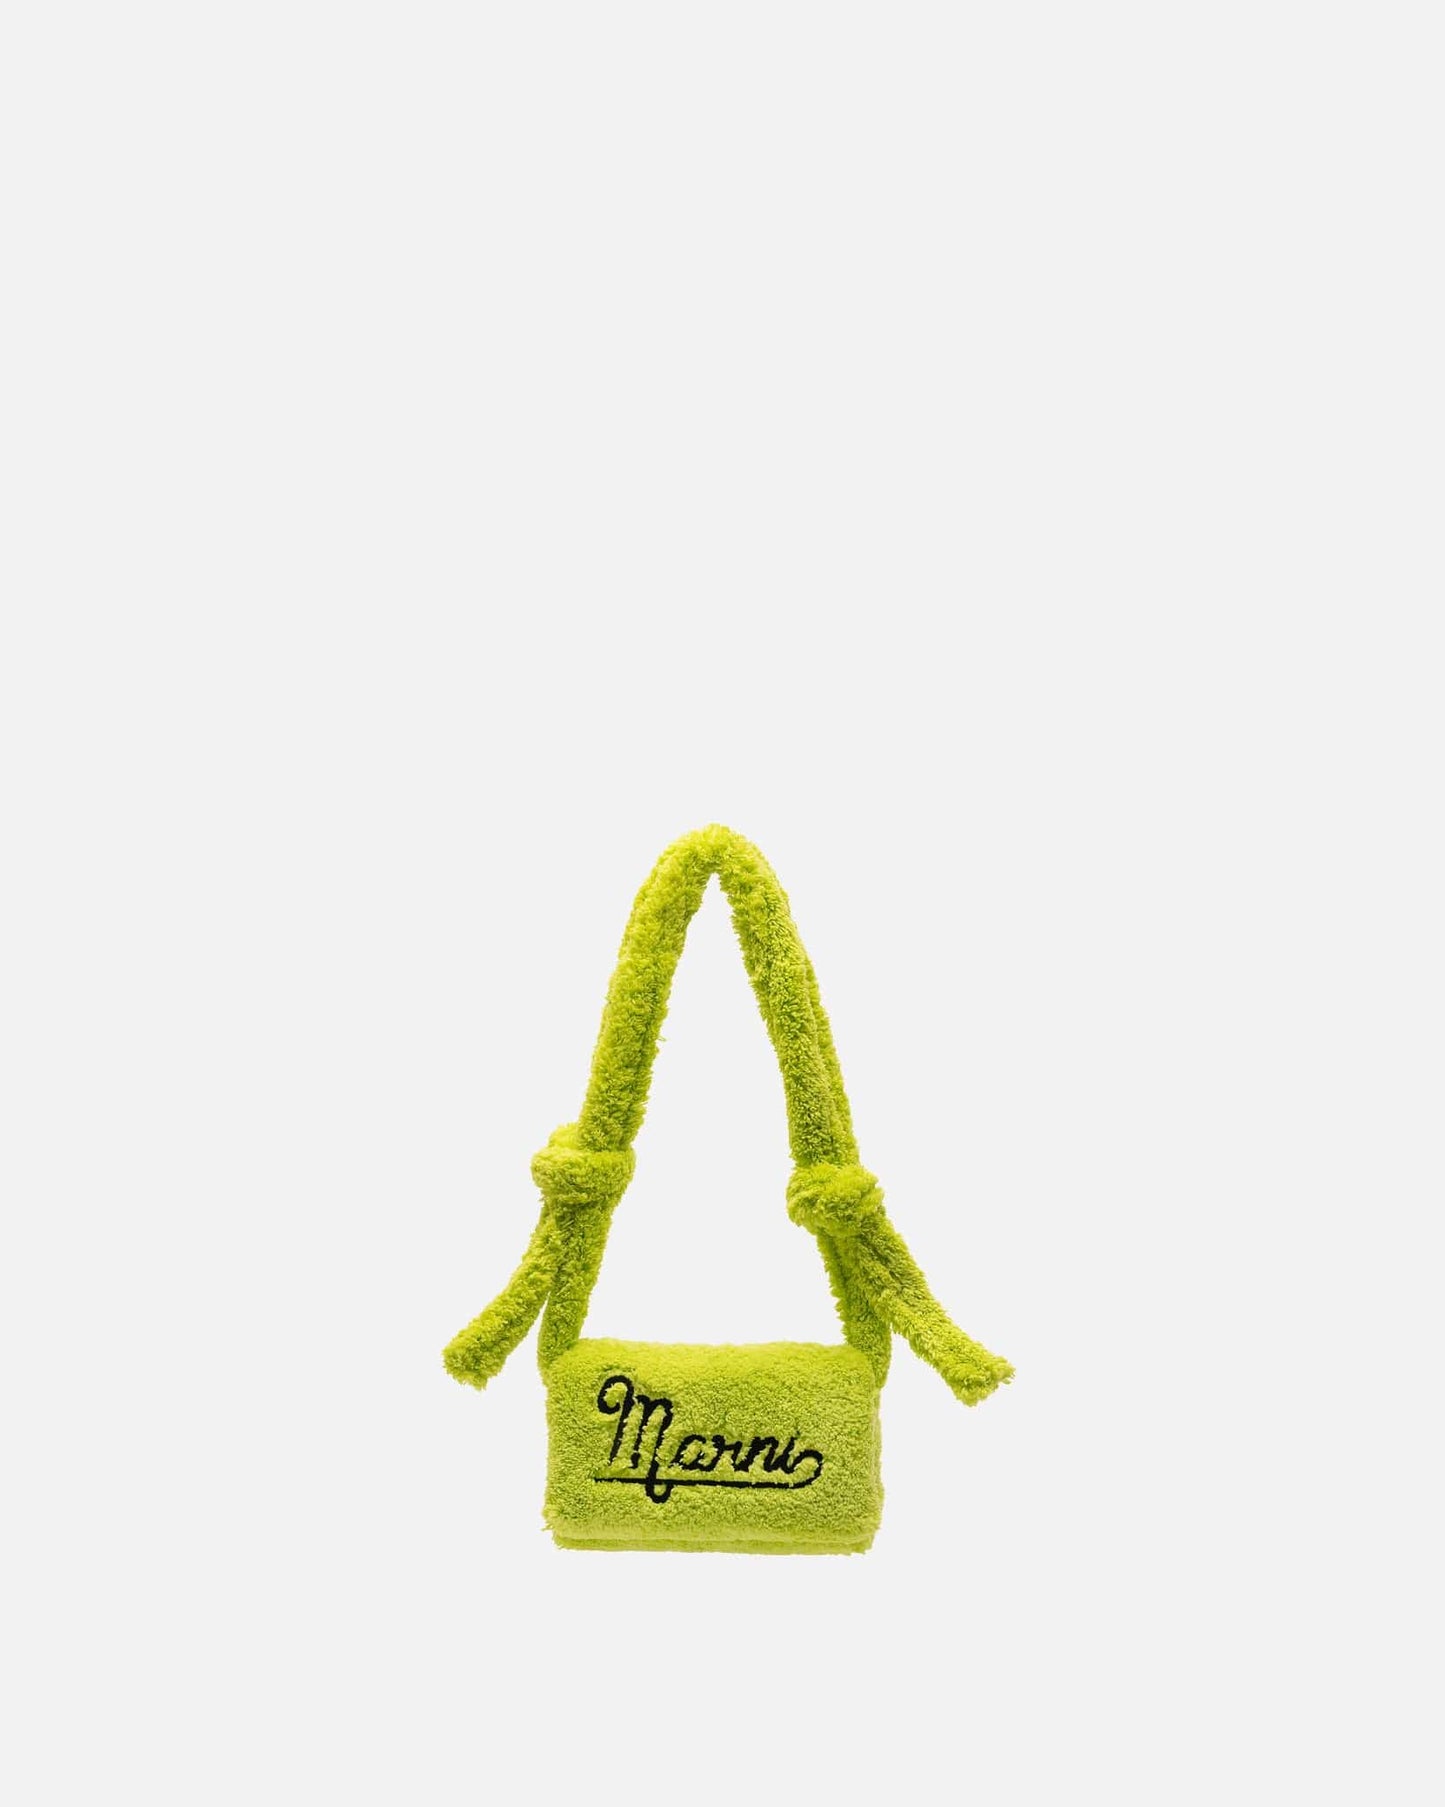 Marni Men's Bags Terry Cloth Large Prism Bag in Light Lime